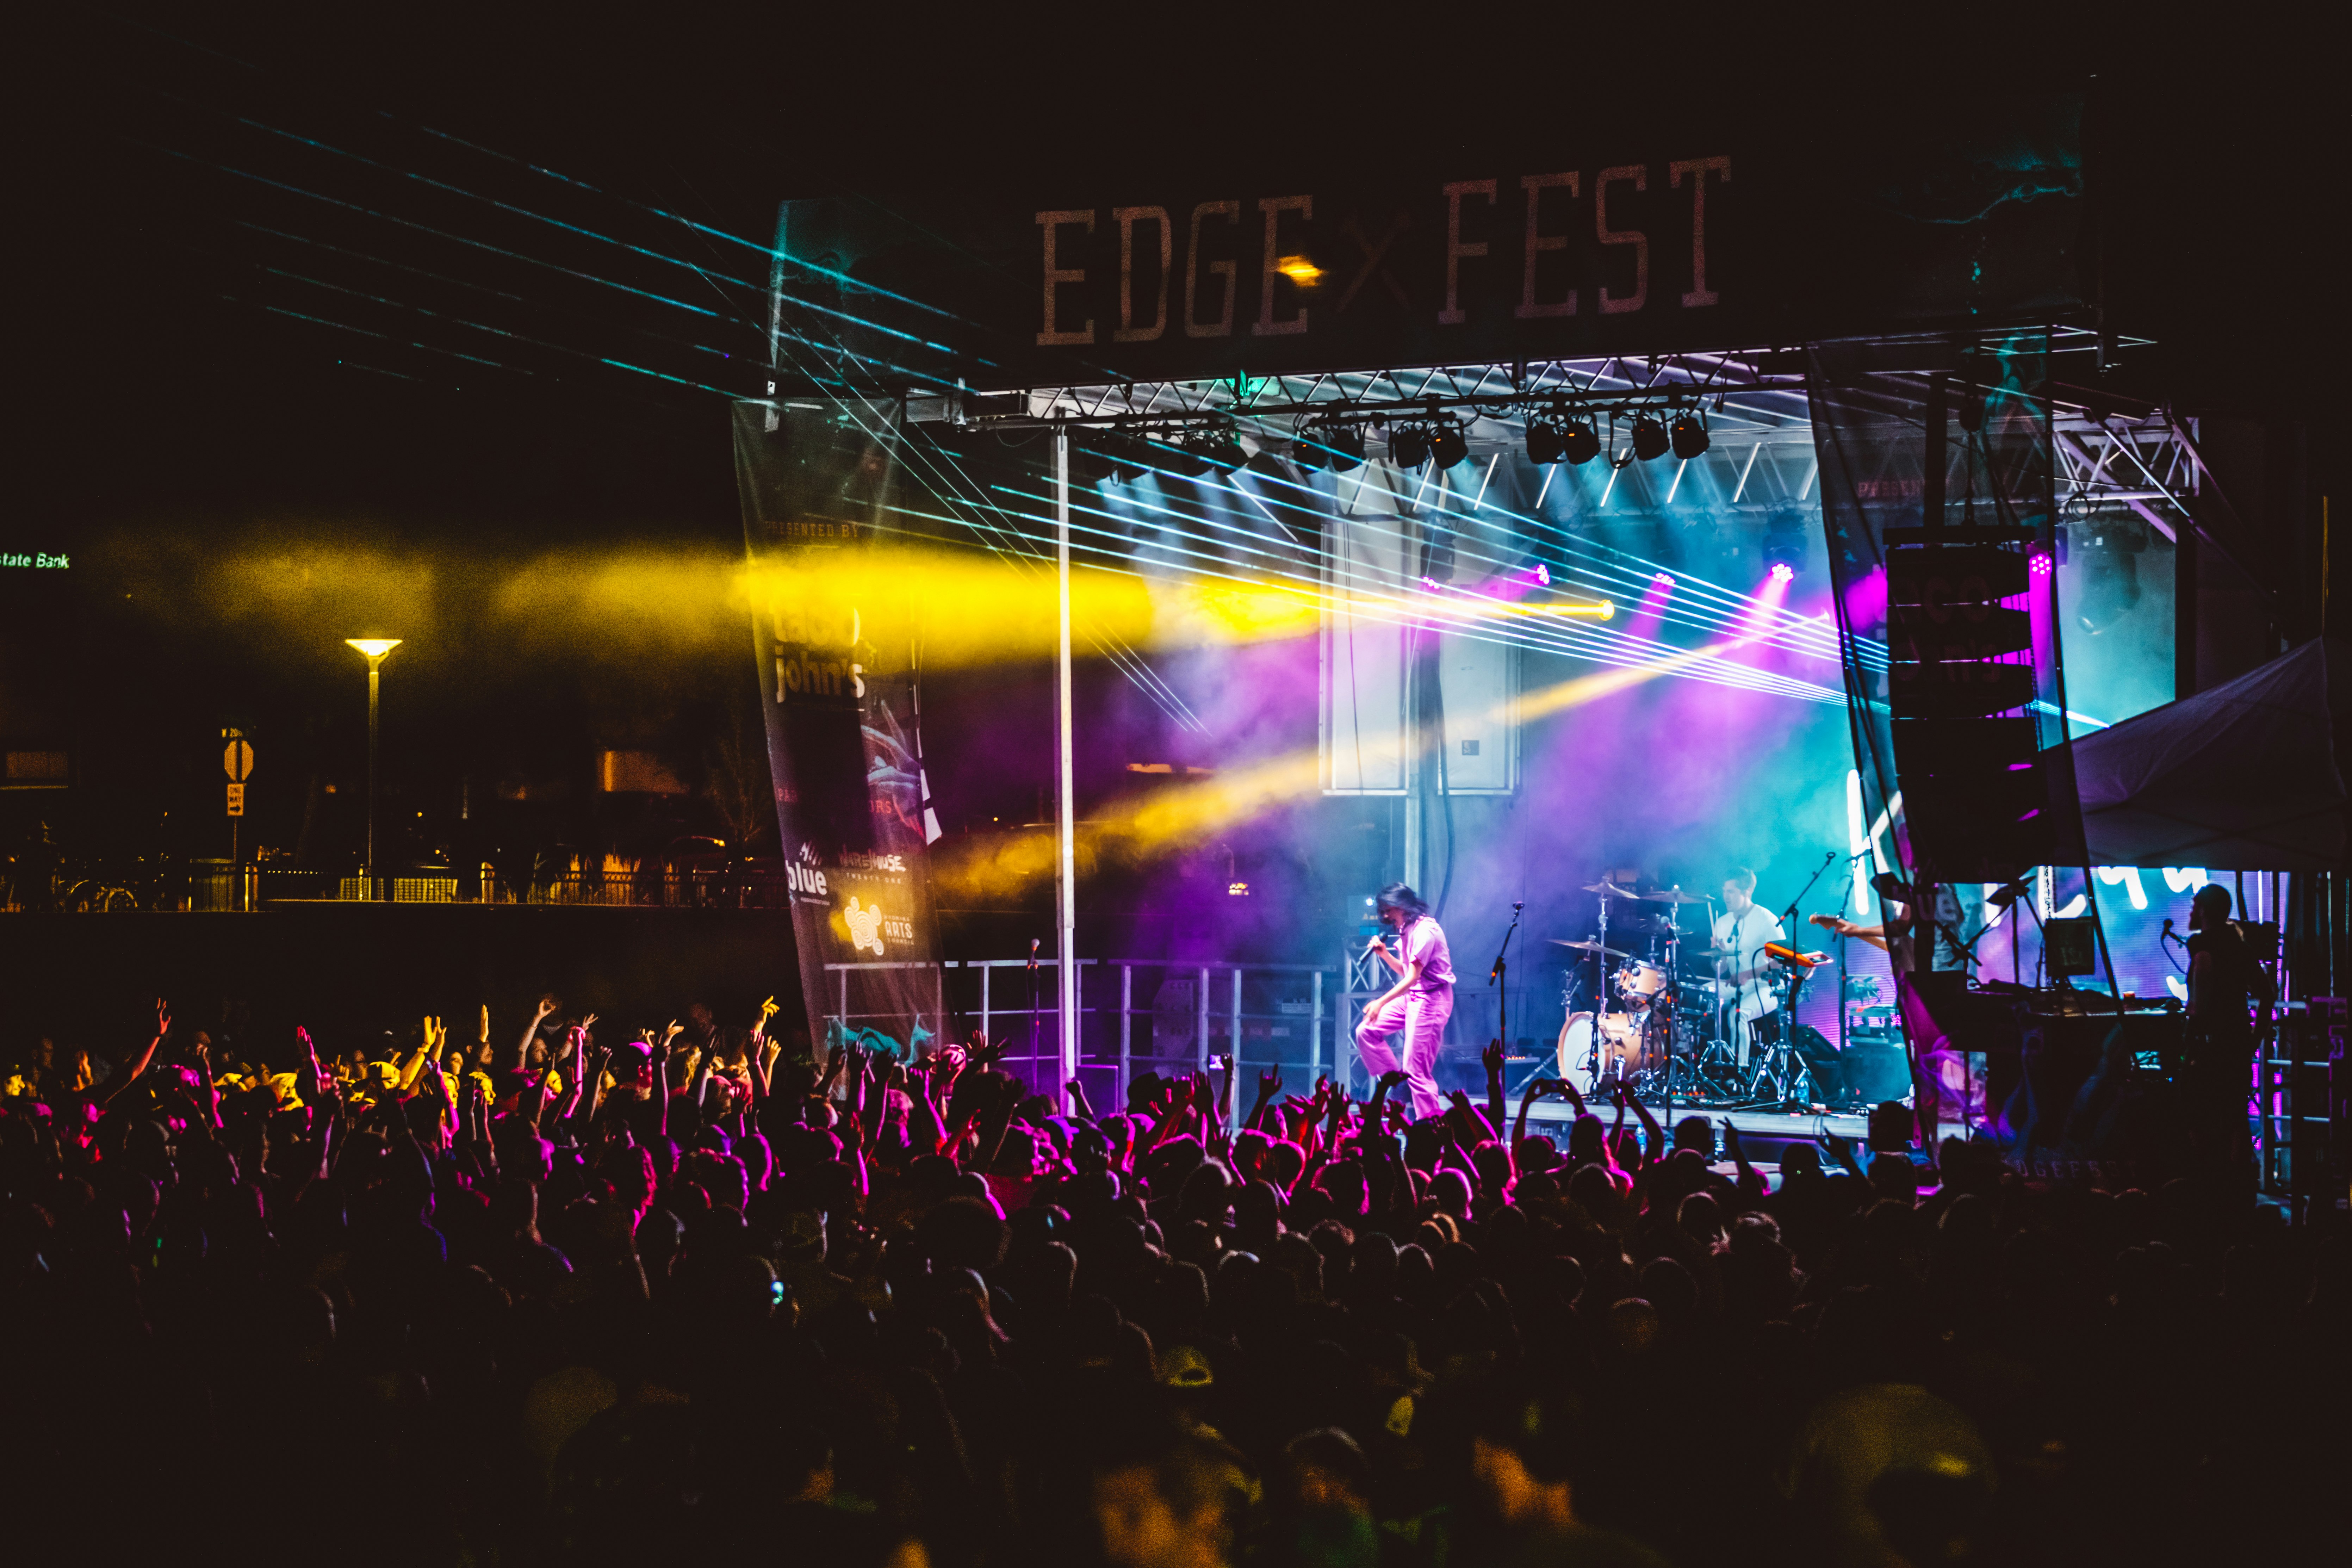 Edge Fest, which has grown to Wyoming's largest outdoor music festival, will come to a close after its 10th anniversary event in August.